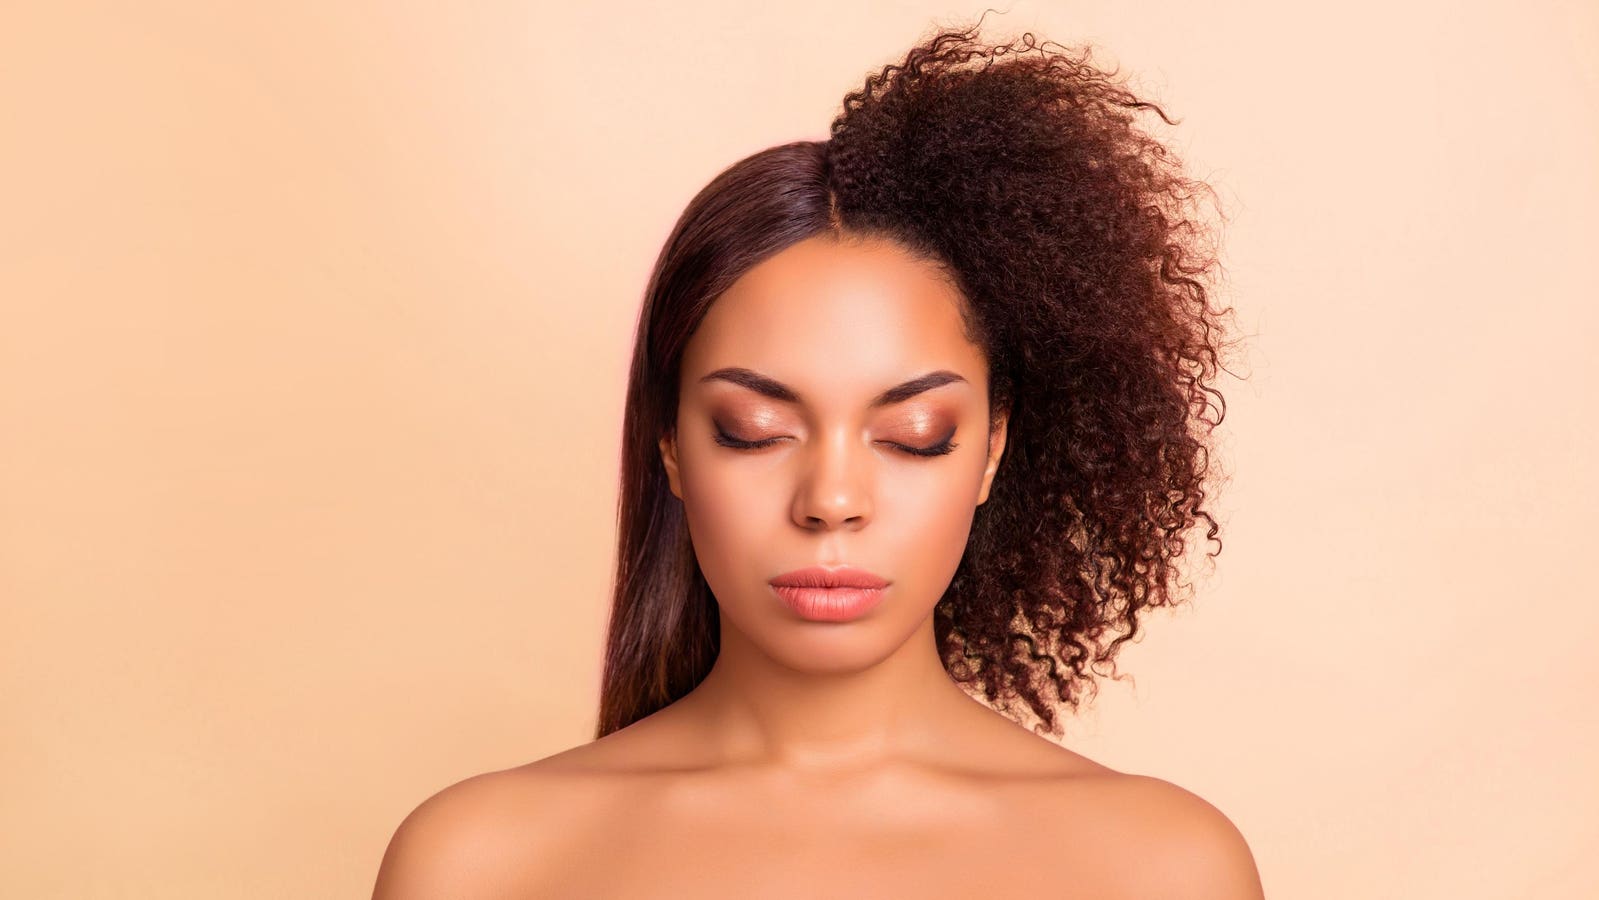 Studies Link Hair Relaxers To Cancer, Many Doctors Question The Data